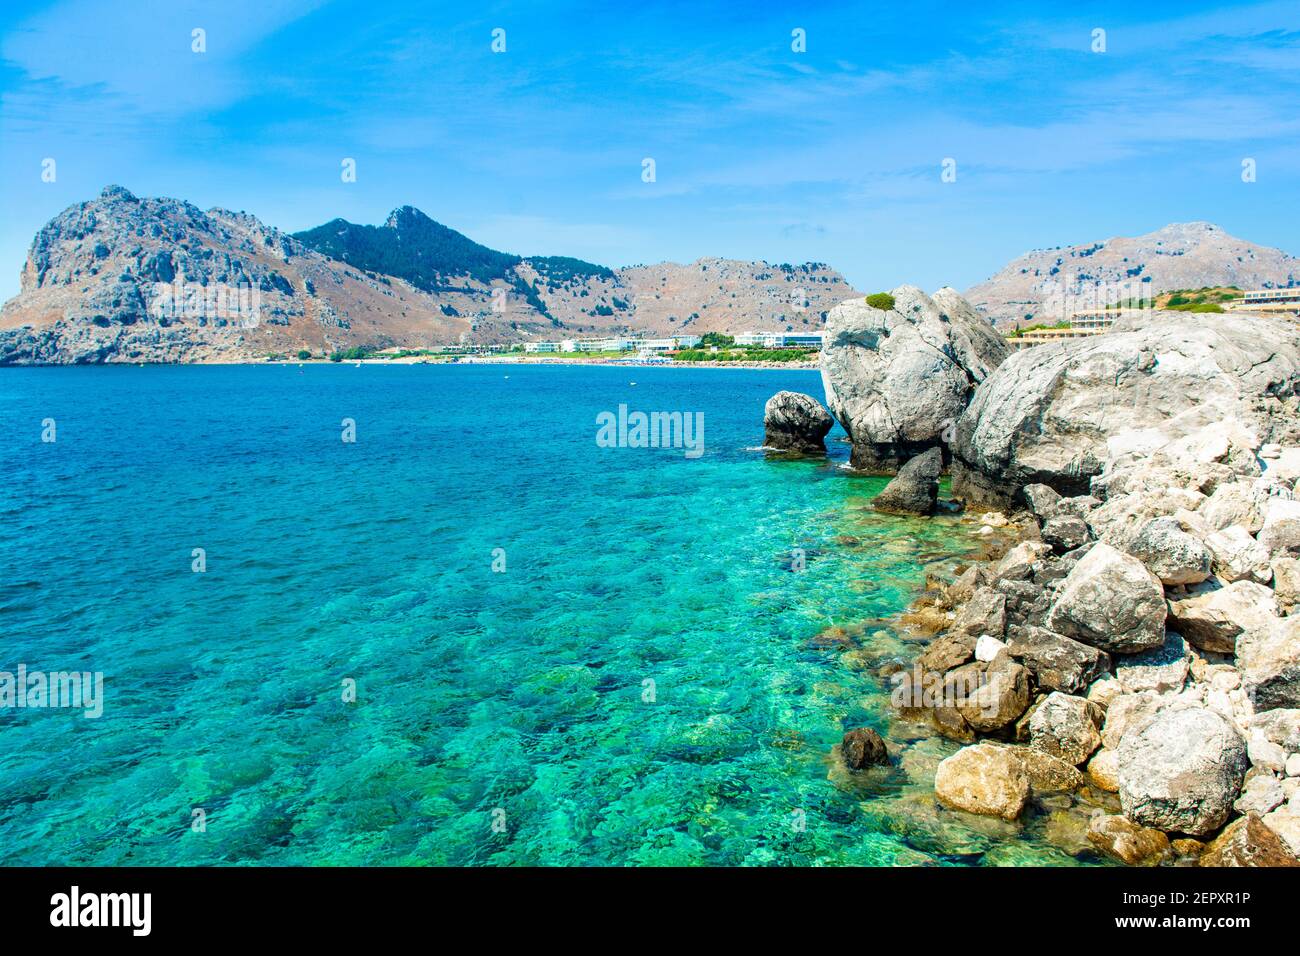 Landscape of beautiful Kolymbia bay in Rhodes island with mountain and rocky beach Stock Photo